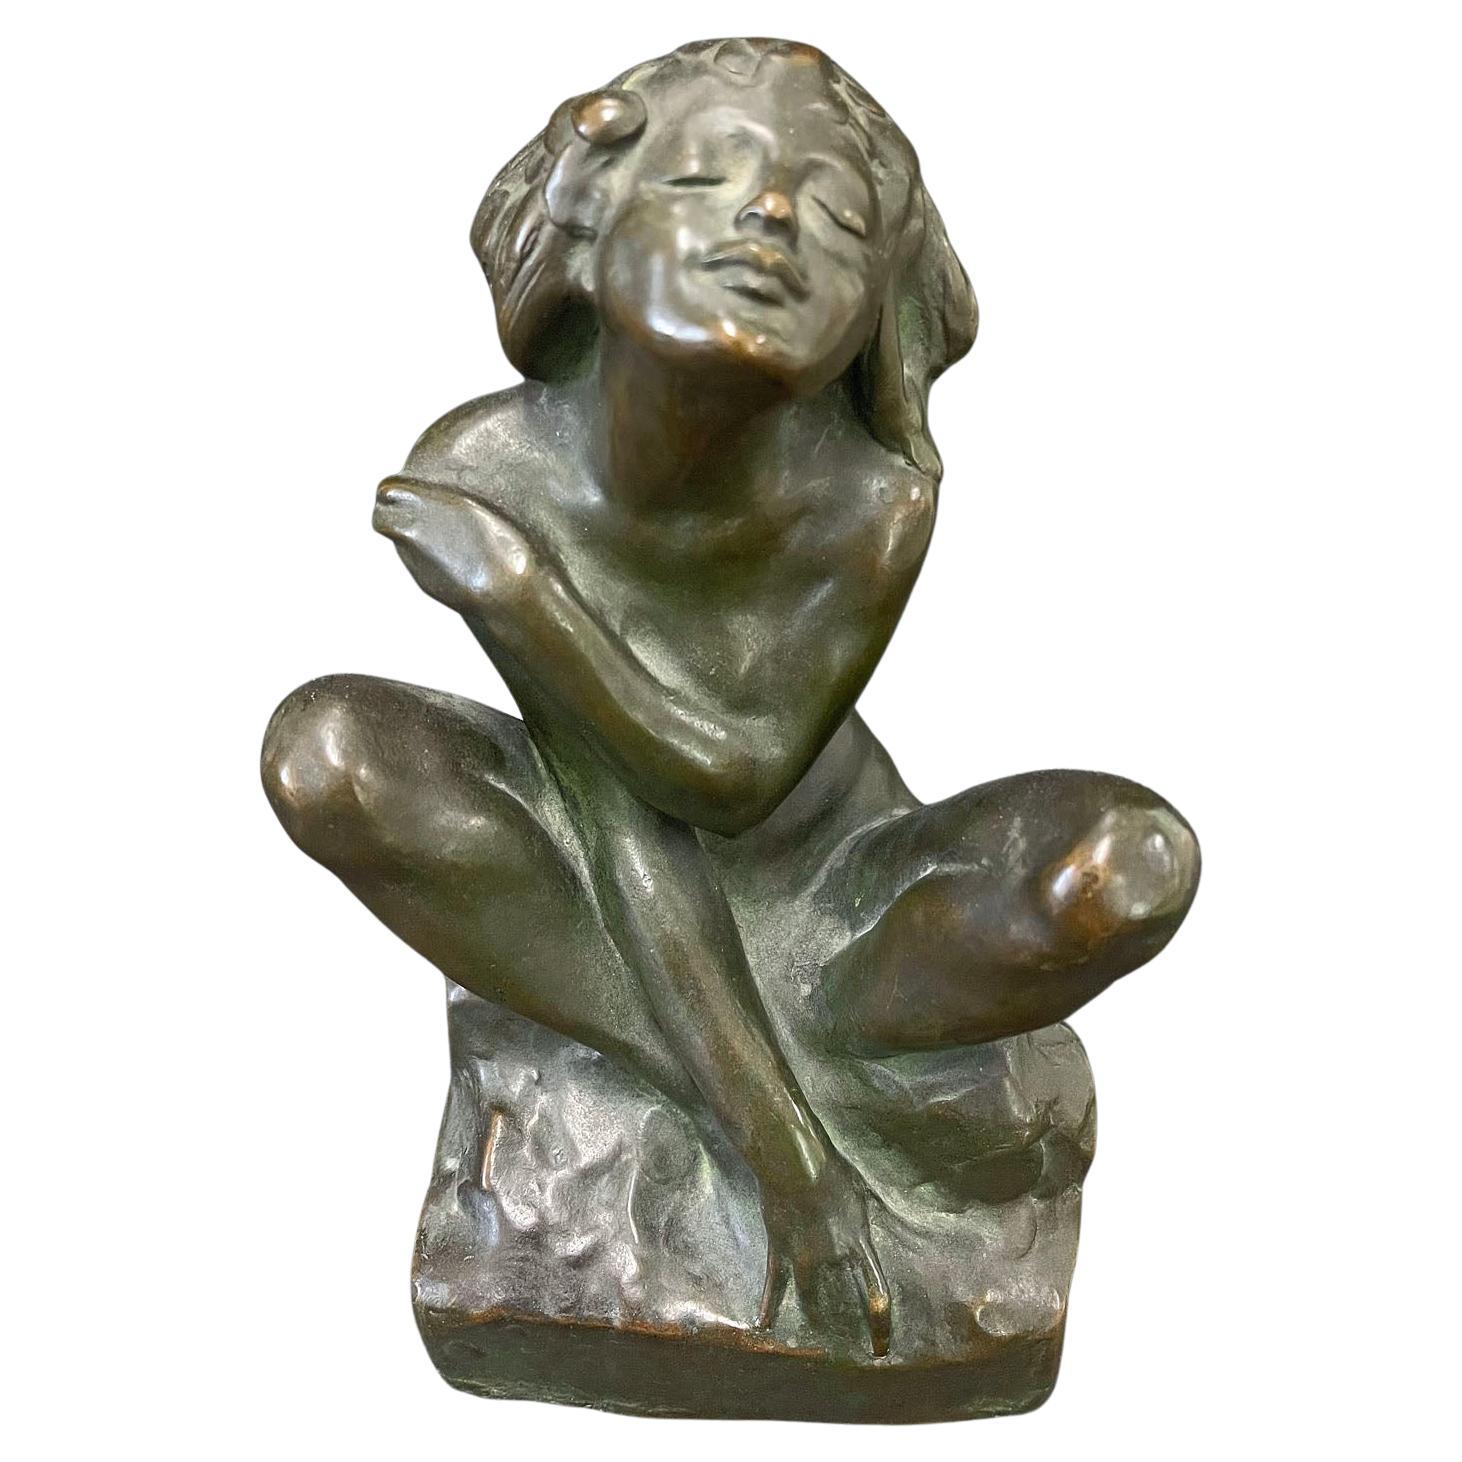 "Bliss, " Unique and Early Bronze of Female Nude by John Gregory, 1907